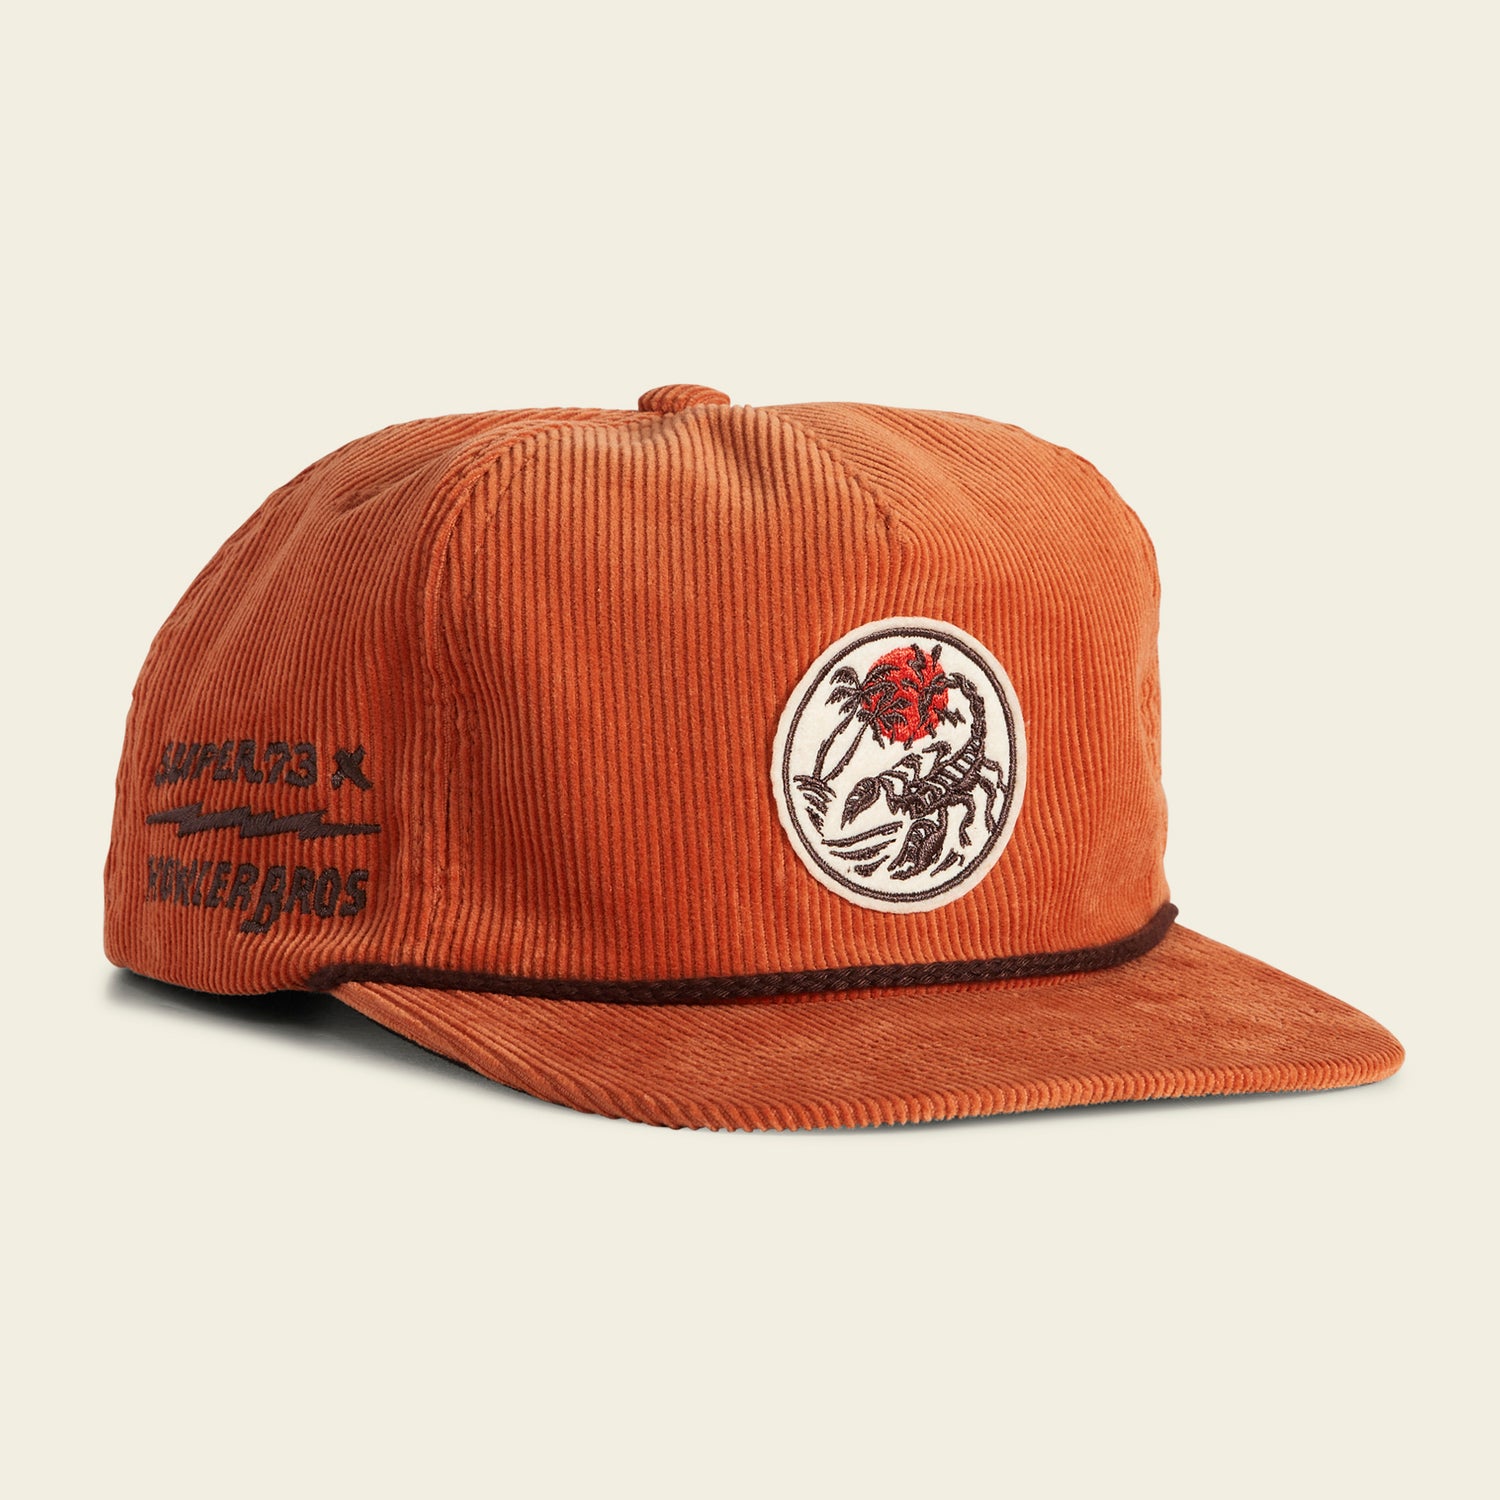 Howler Brothers x Super73 Snapback